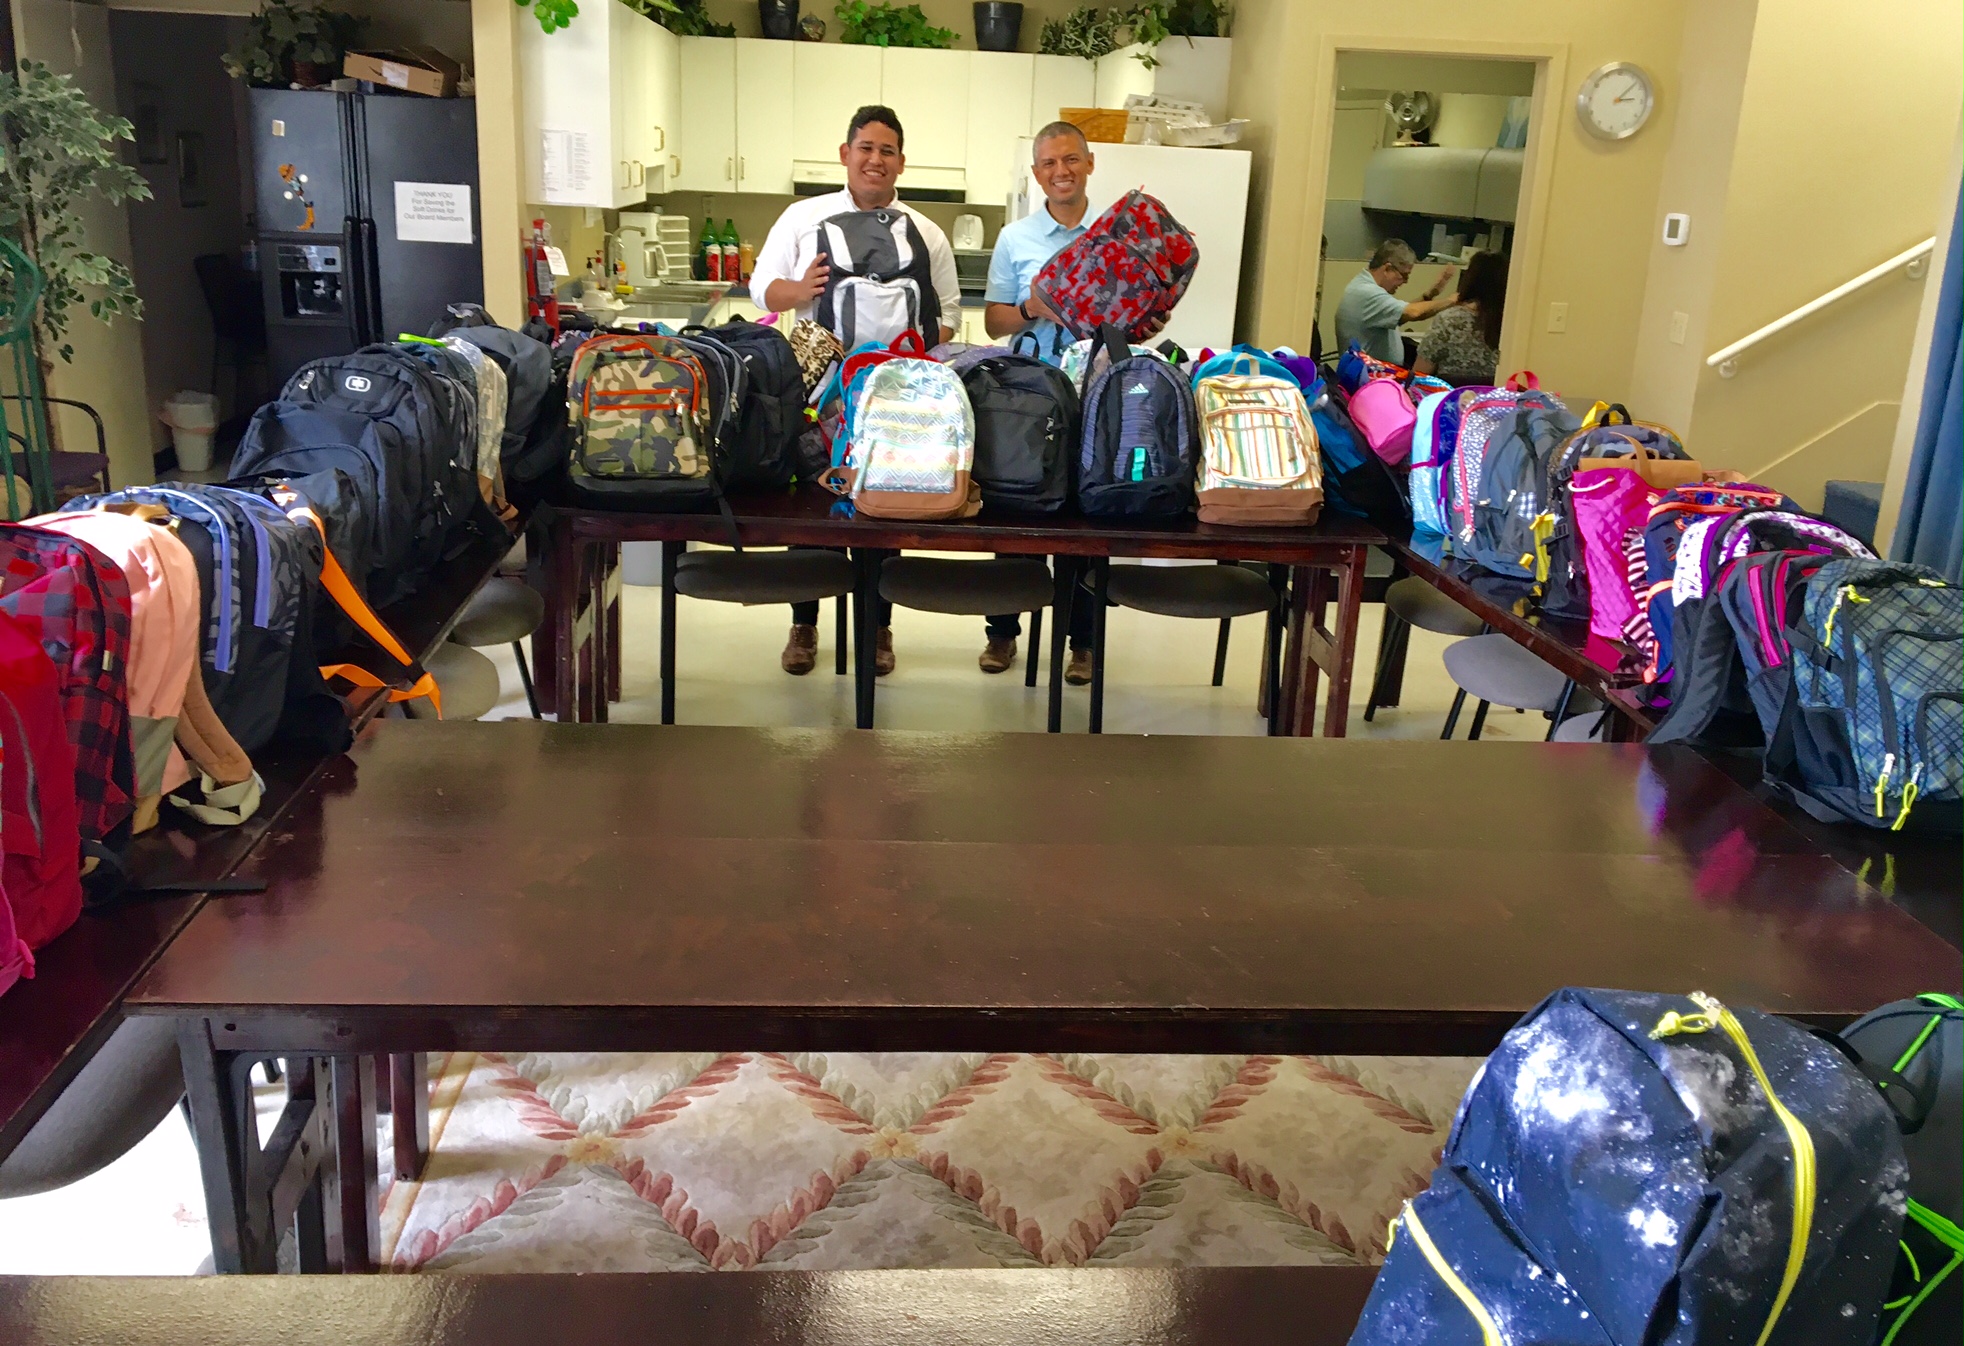 School Supplies and Back to School Clothing Drive happening - donate now! -  Franklin Community Center